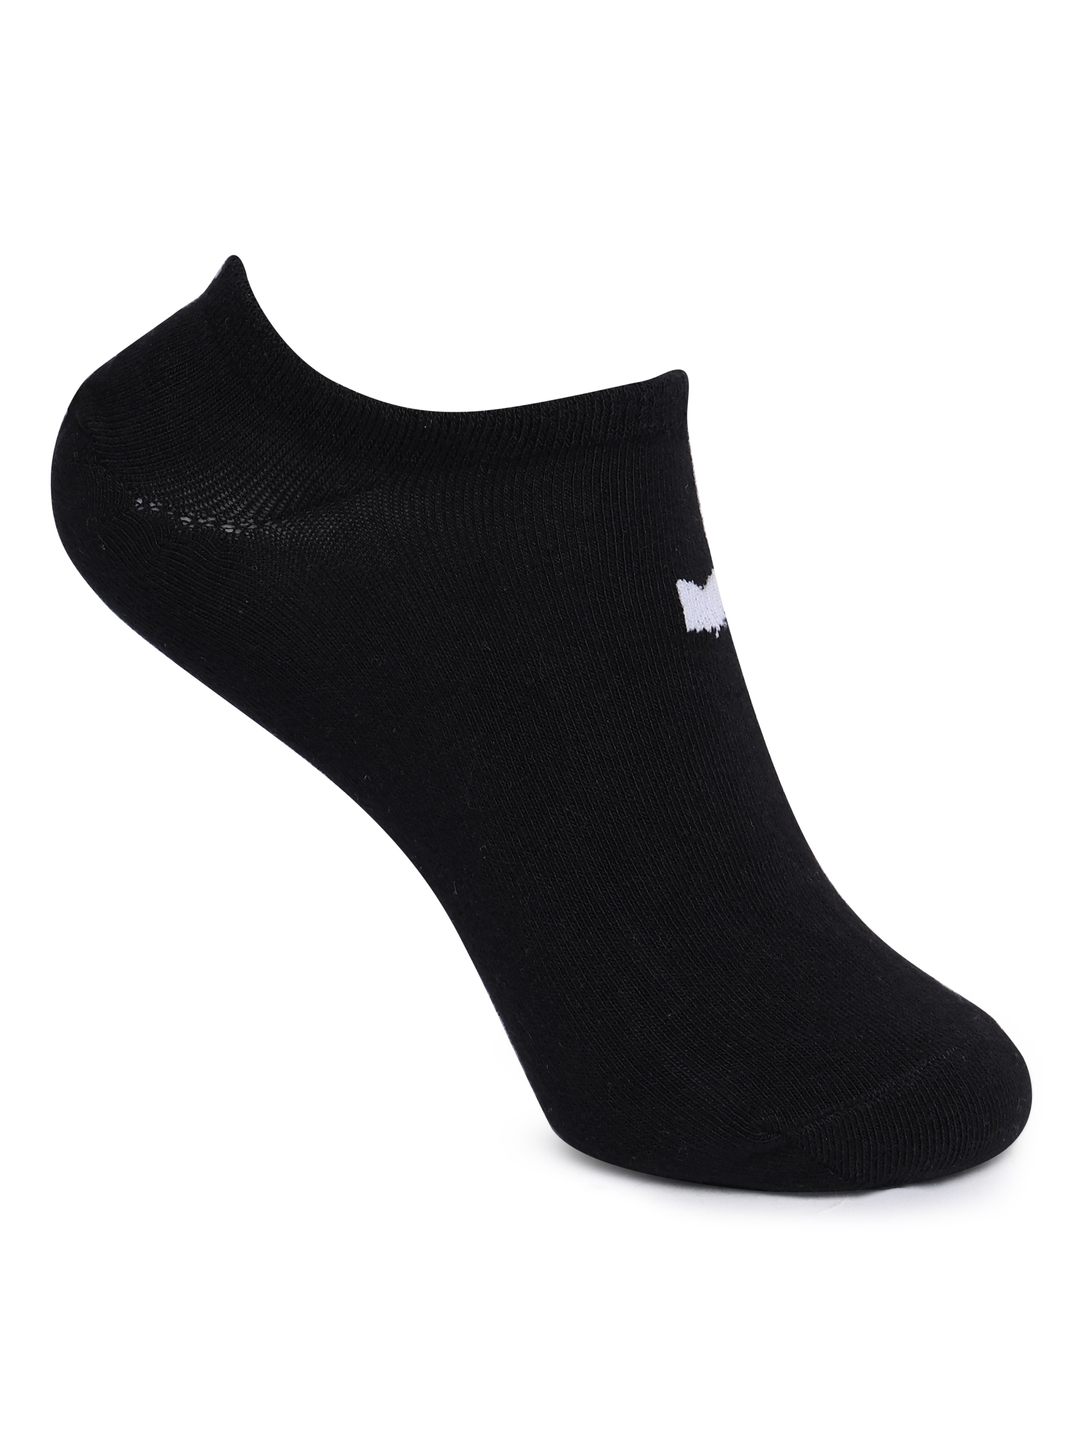 NATE IN Multi Colour Solid Socks (Pack of 4)